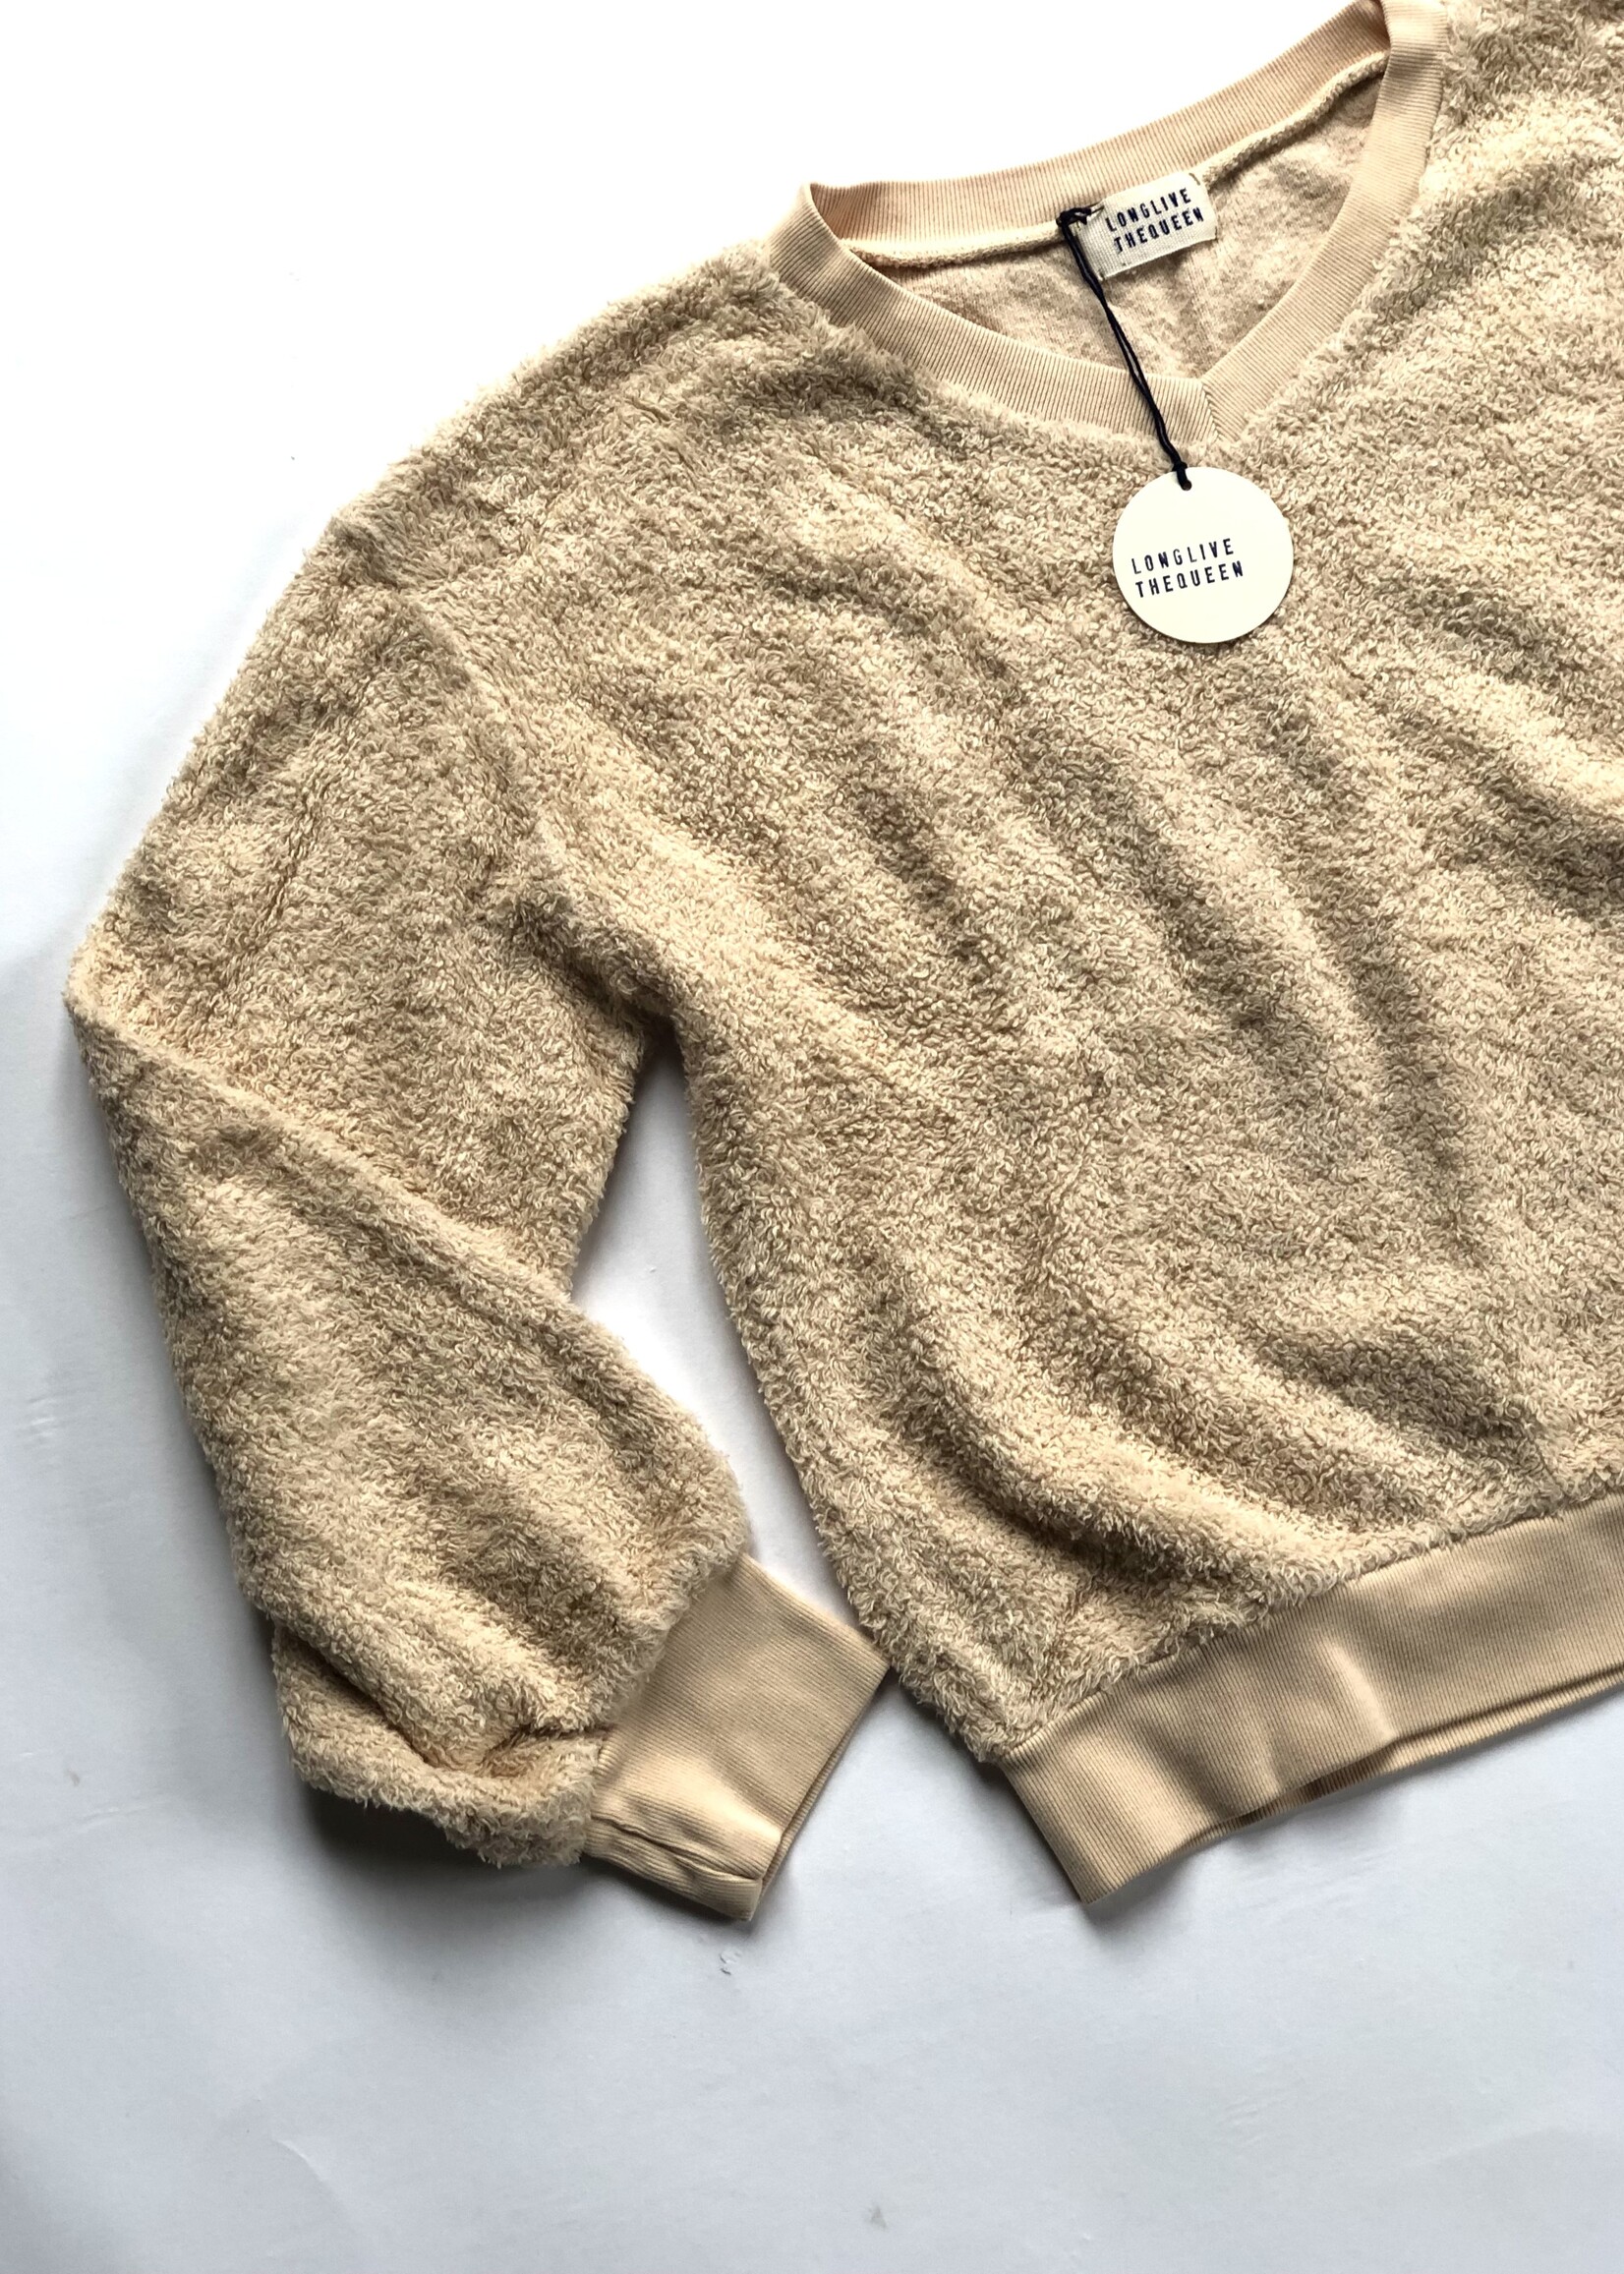 Long Live The Queen Creme terry V-neck sweater 10y